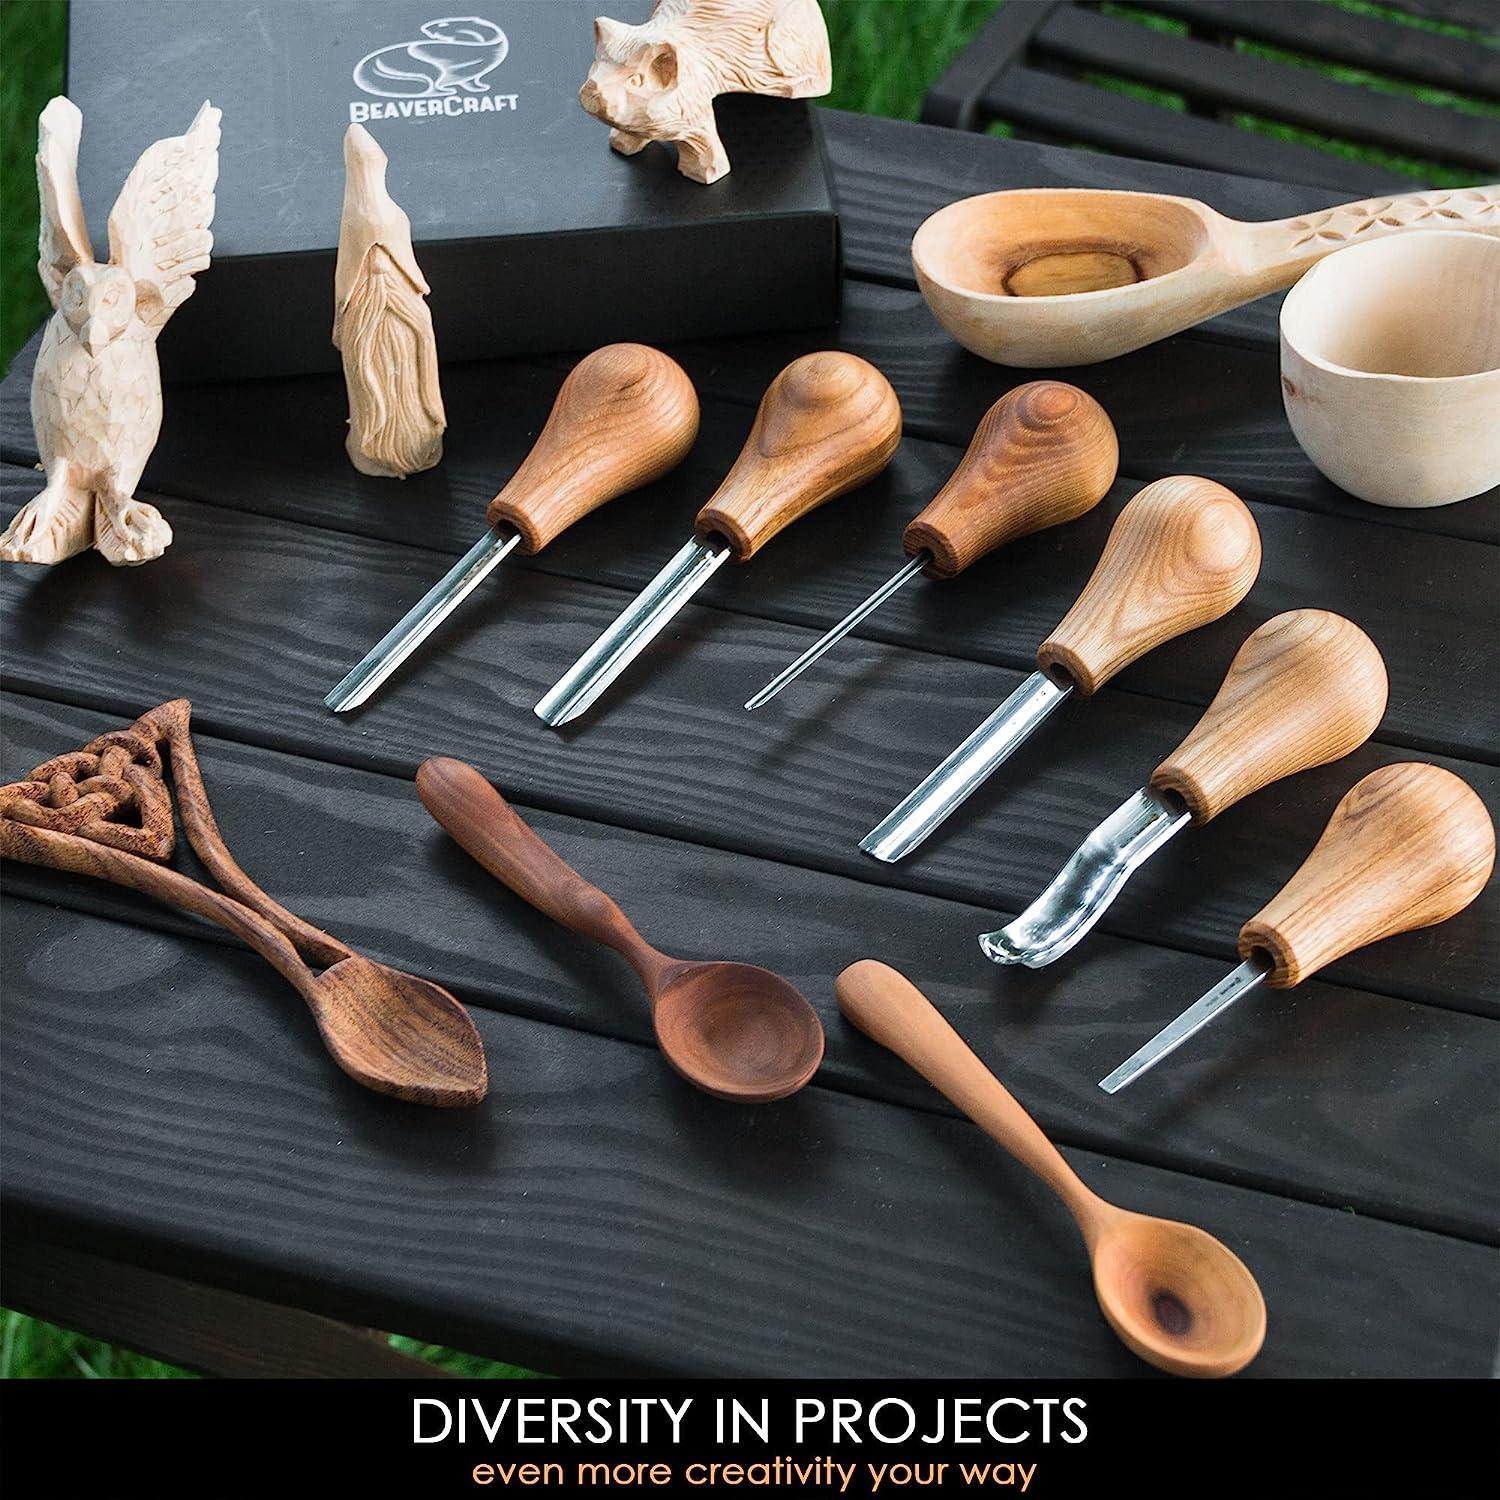 An Introduction to Traditional Wood Carving with BeaverCraft Tools